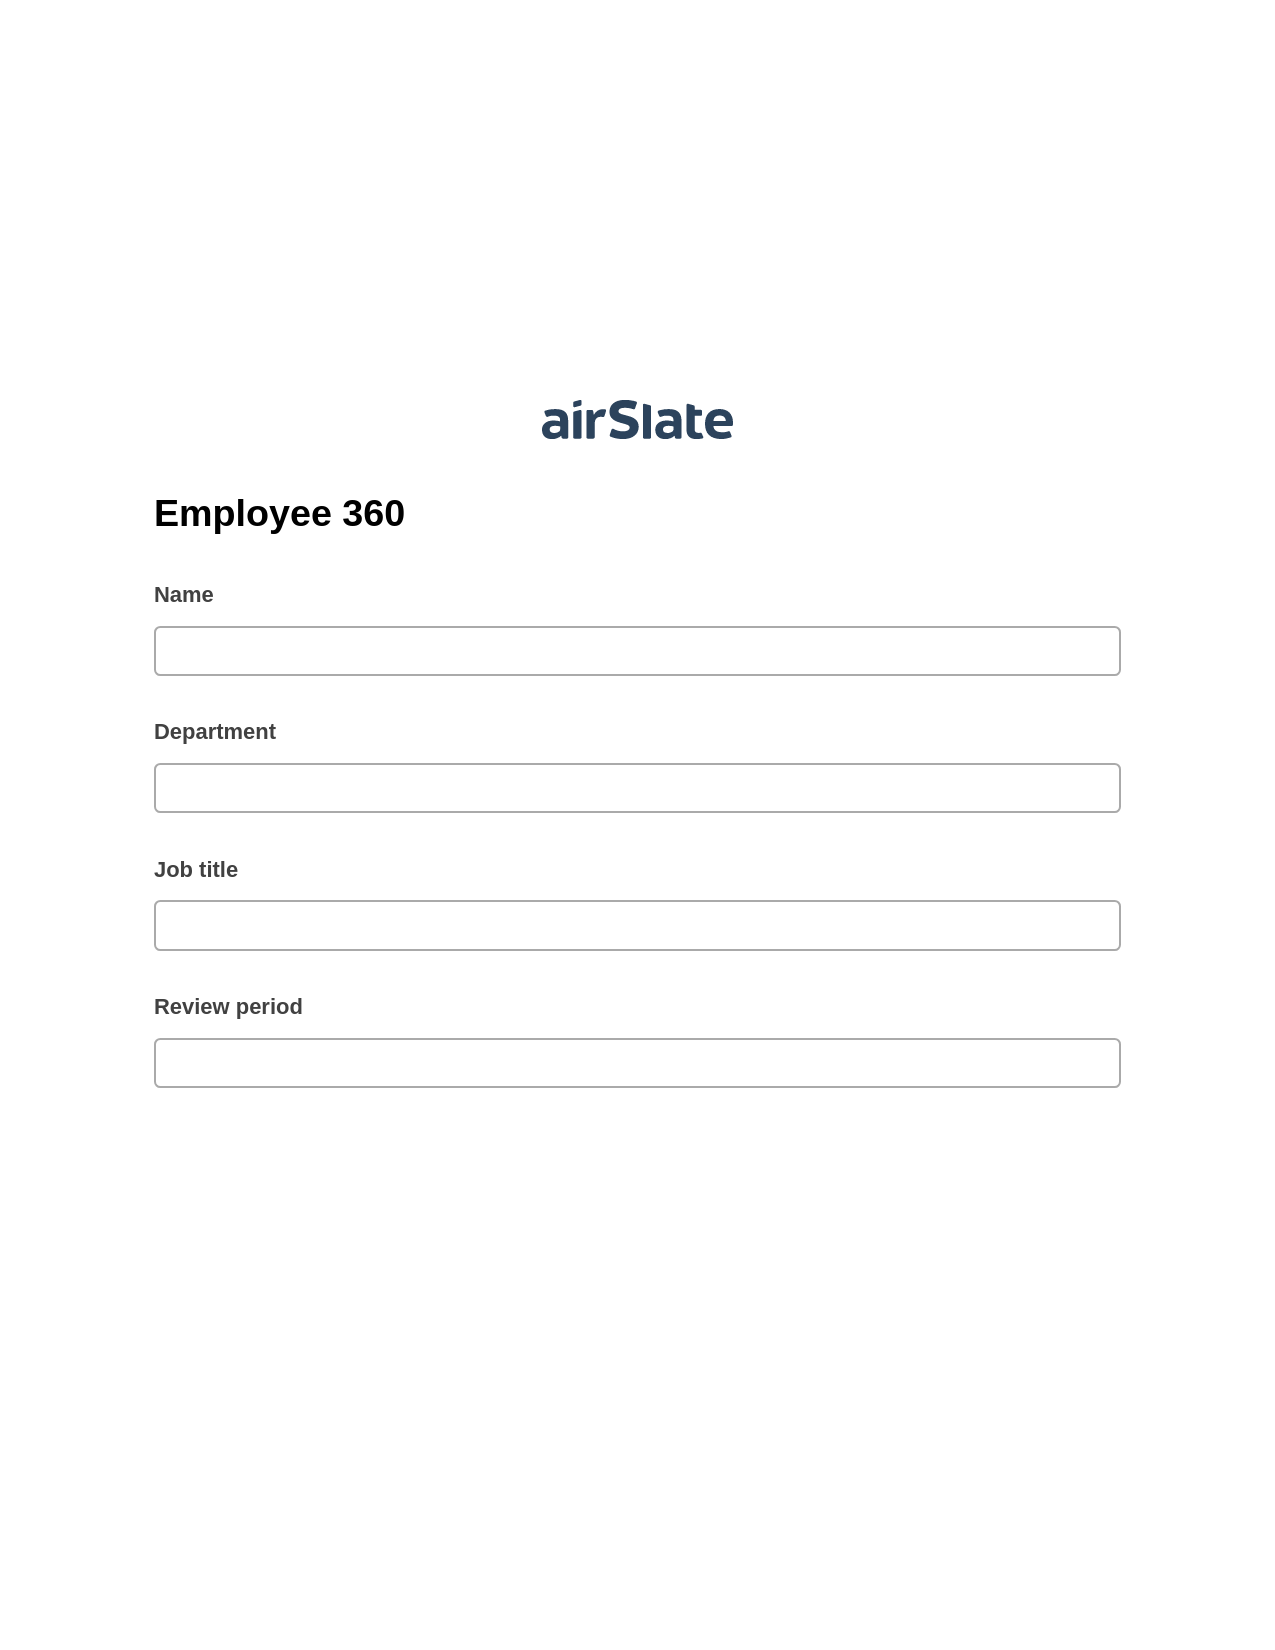 Employee 360 Prefill from NetSuite records, Set signature type addon, Export to WebMerge Bot